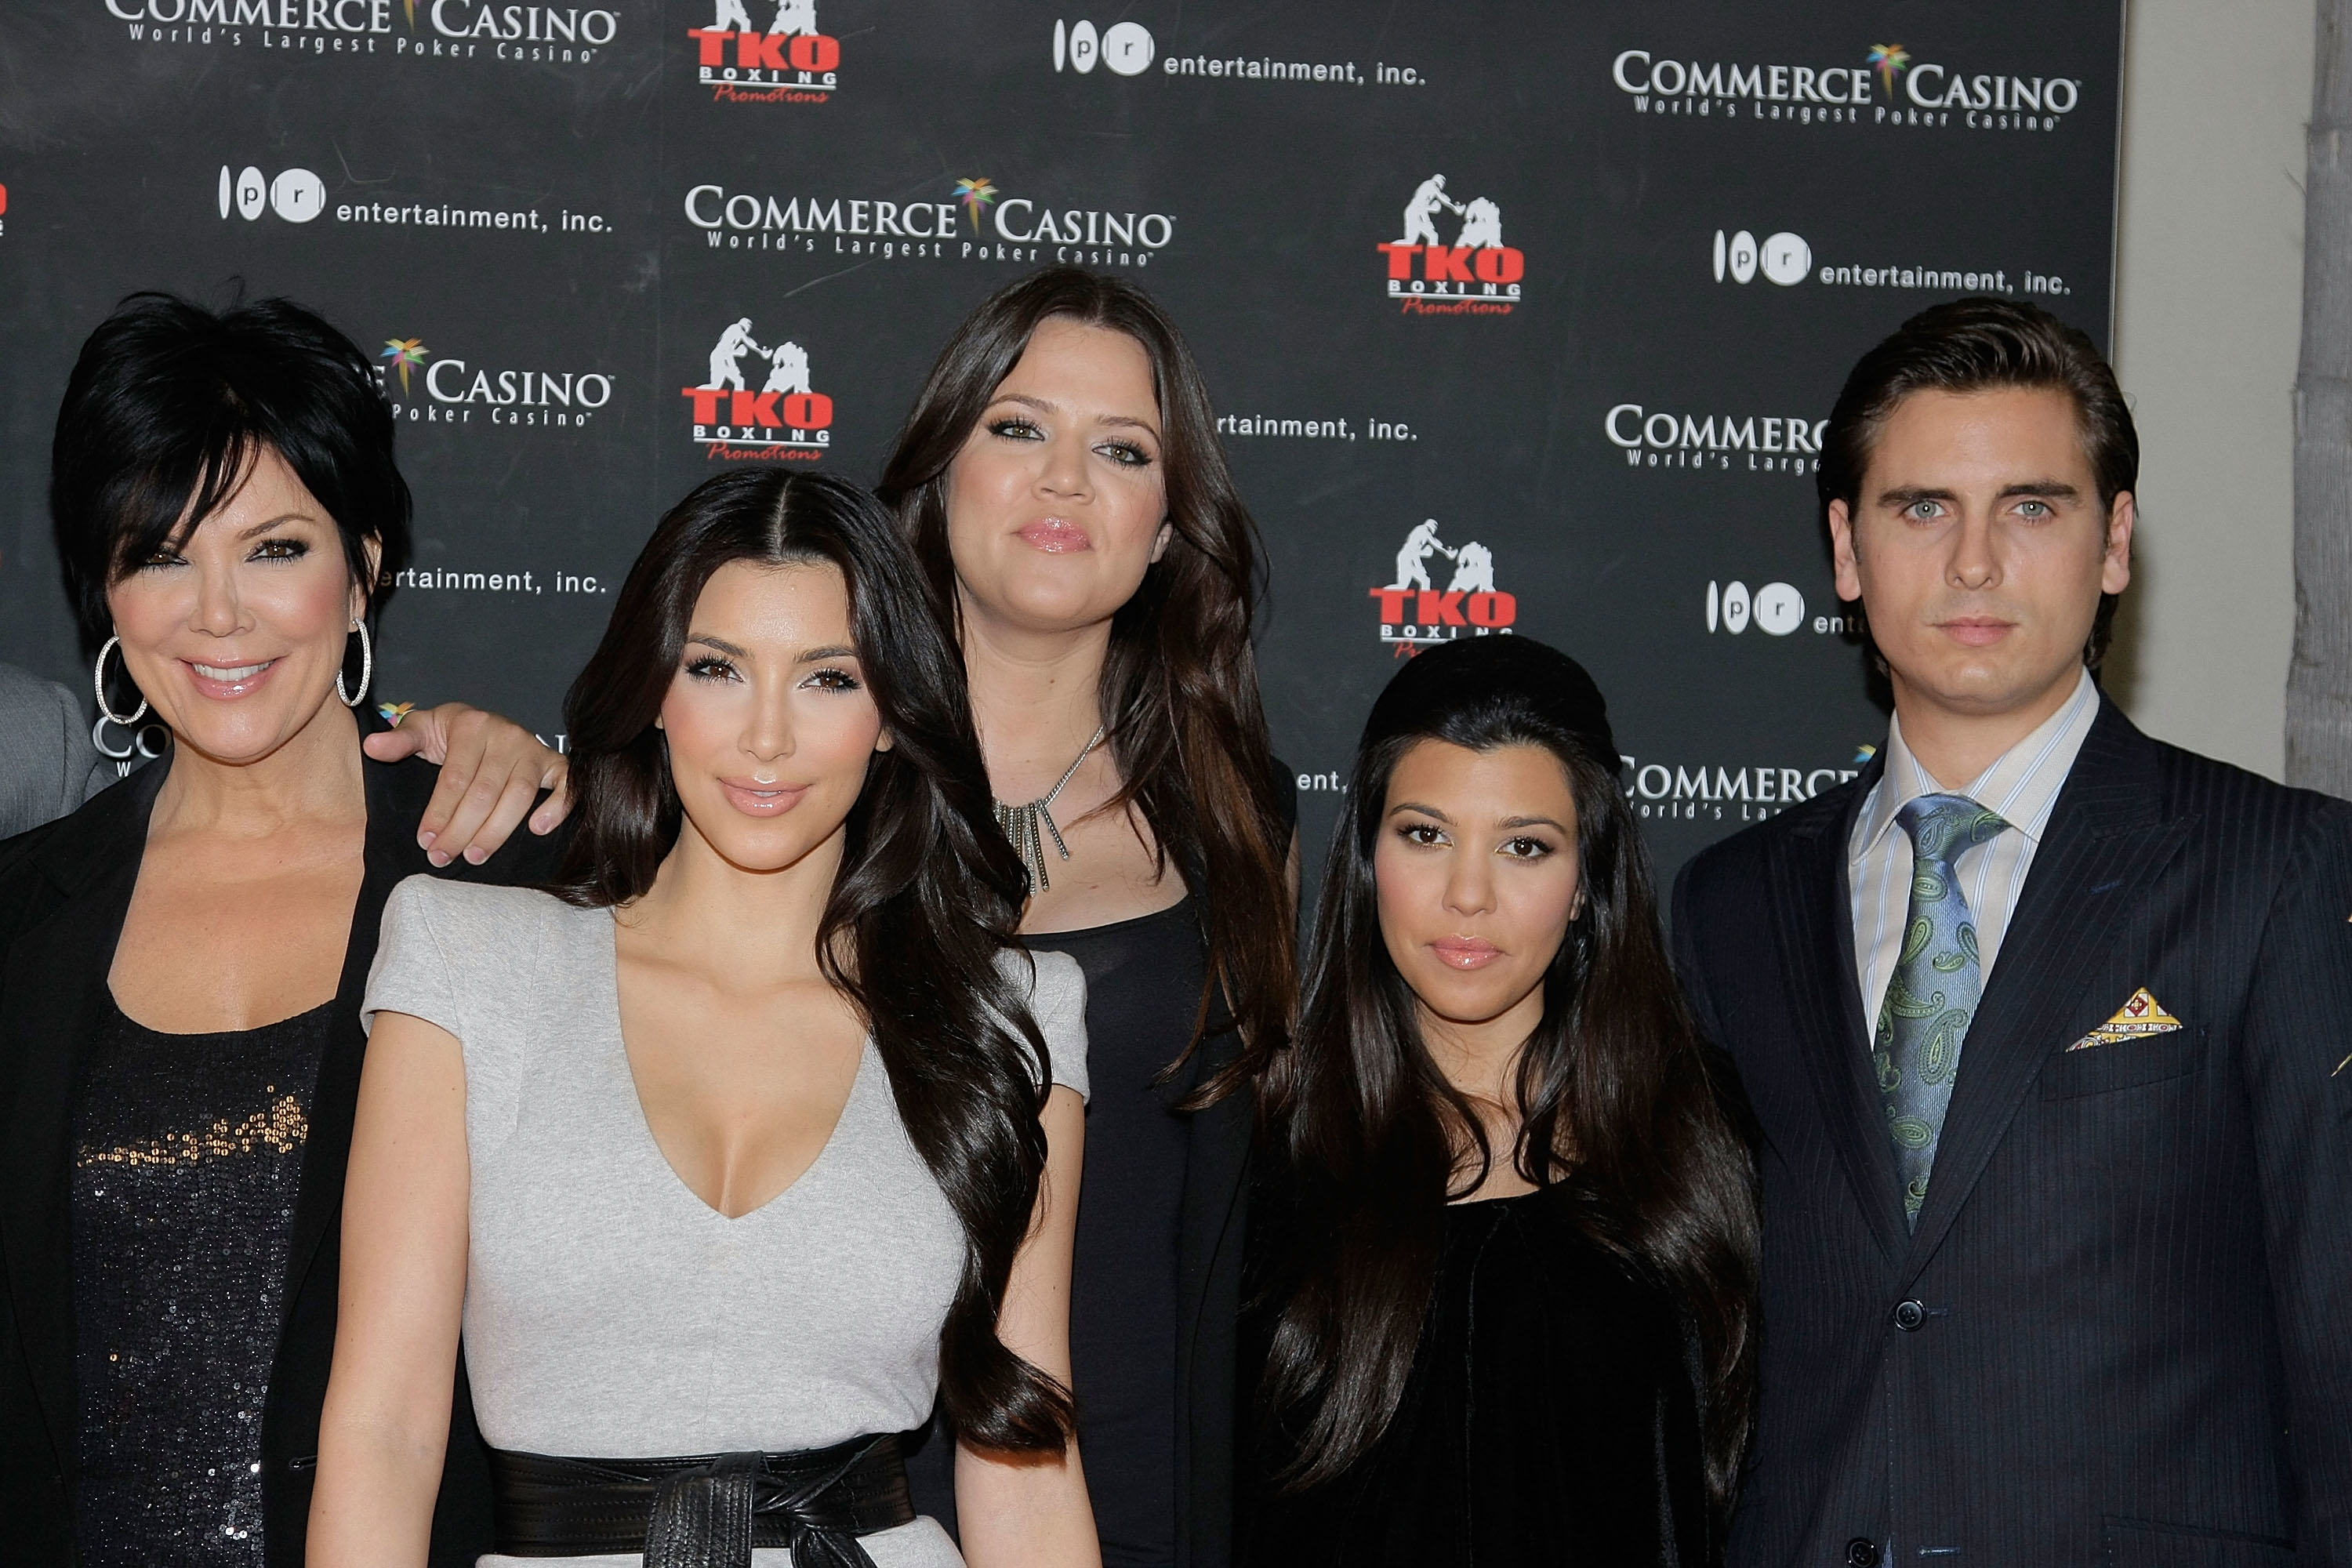 Close-up of Scott with Khloé, Kim, Kourtney, and Kris at a media event